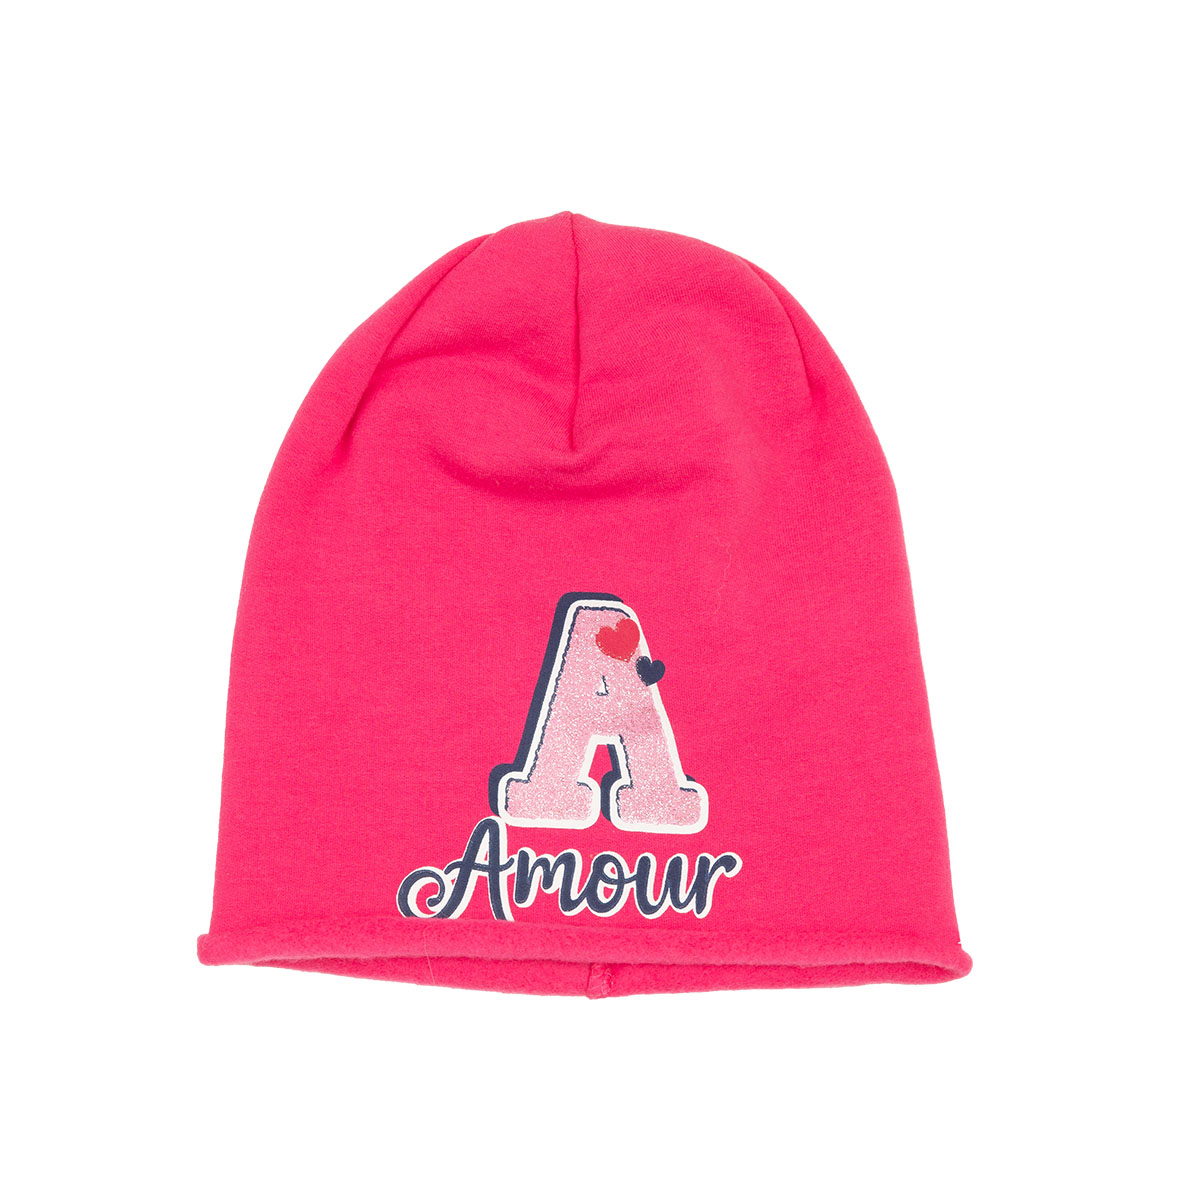 Mawi cappello felpa  con stampa  amour kid - Mawi